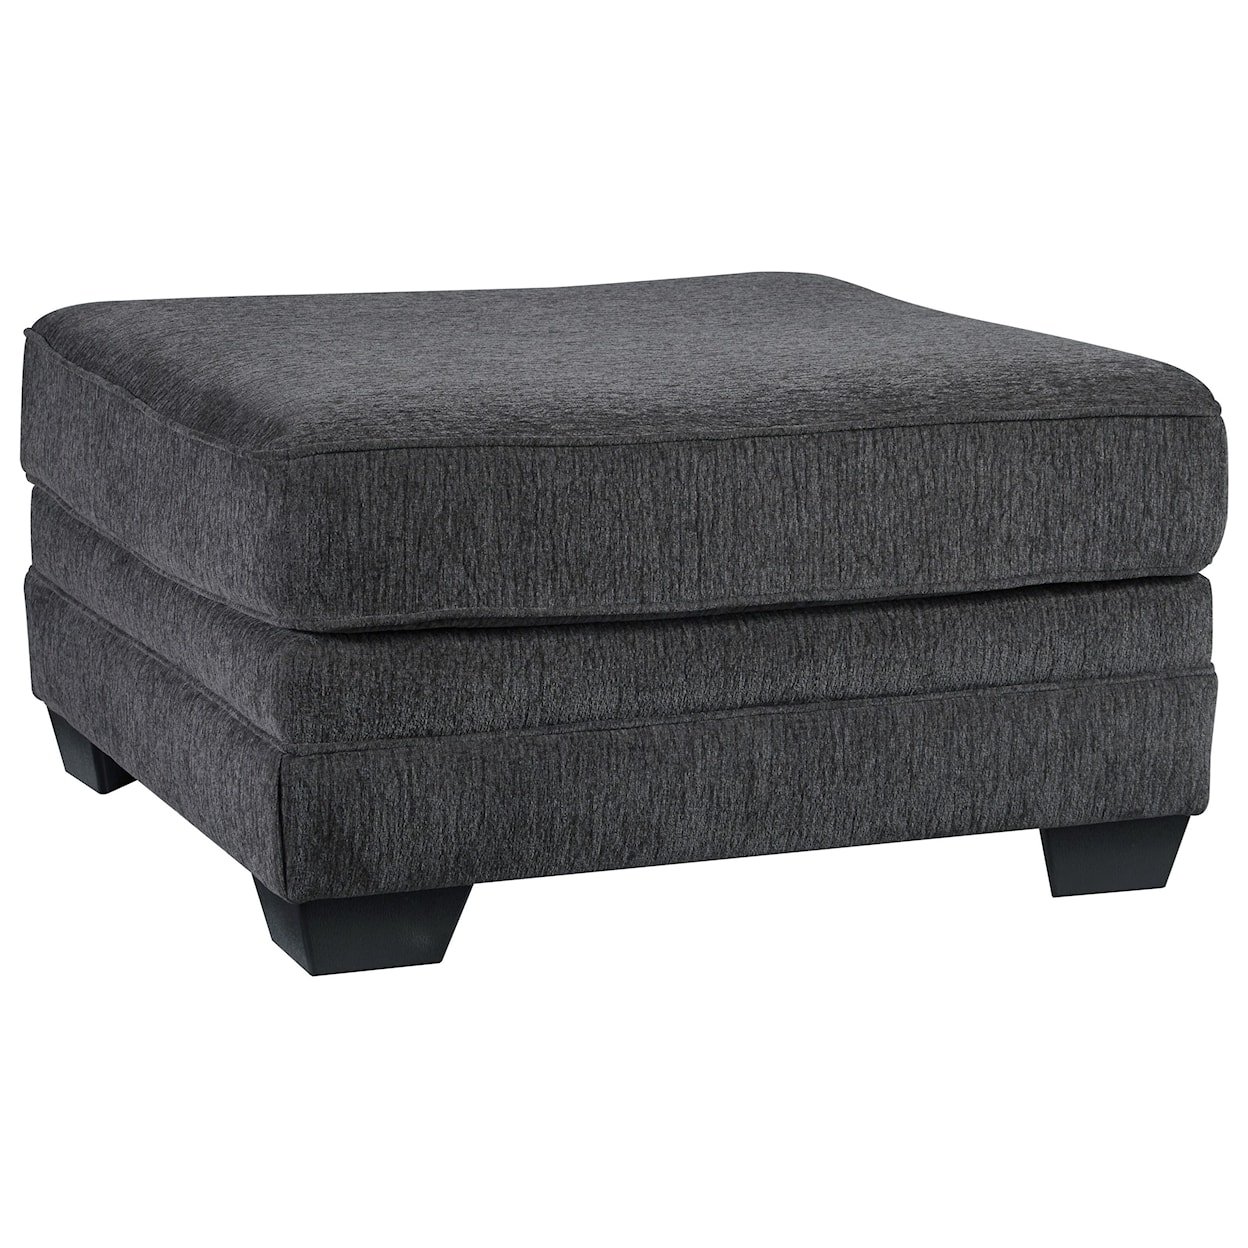 JB King Tracling Oversized Accent Ottoman